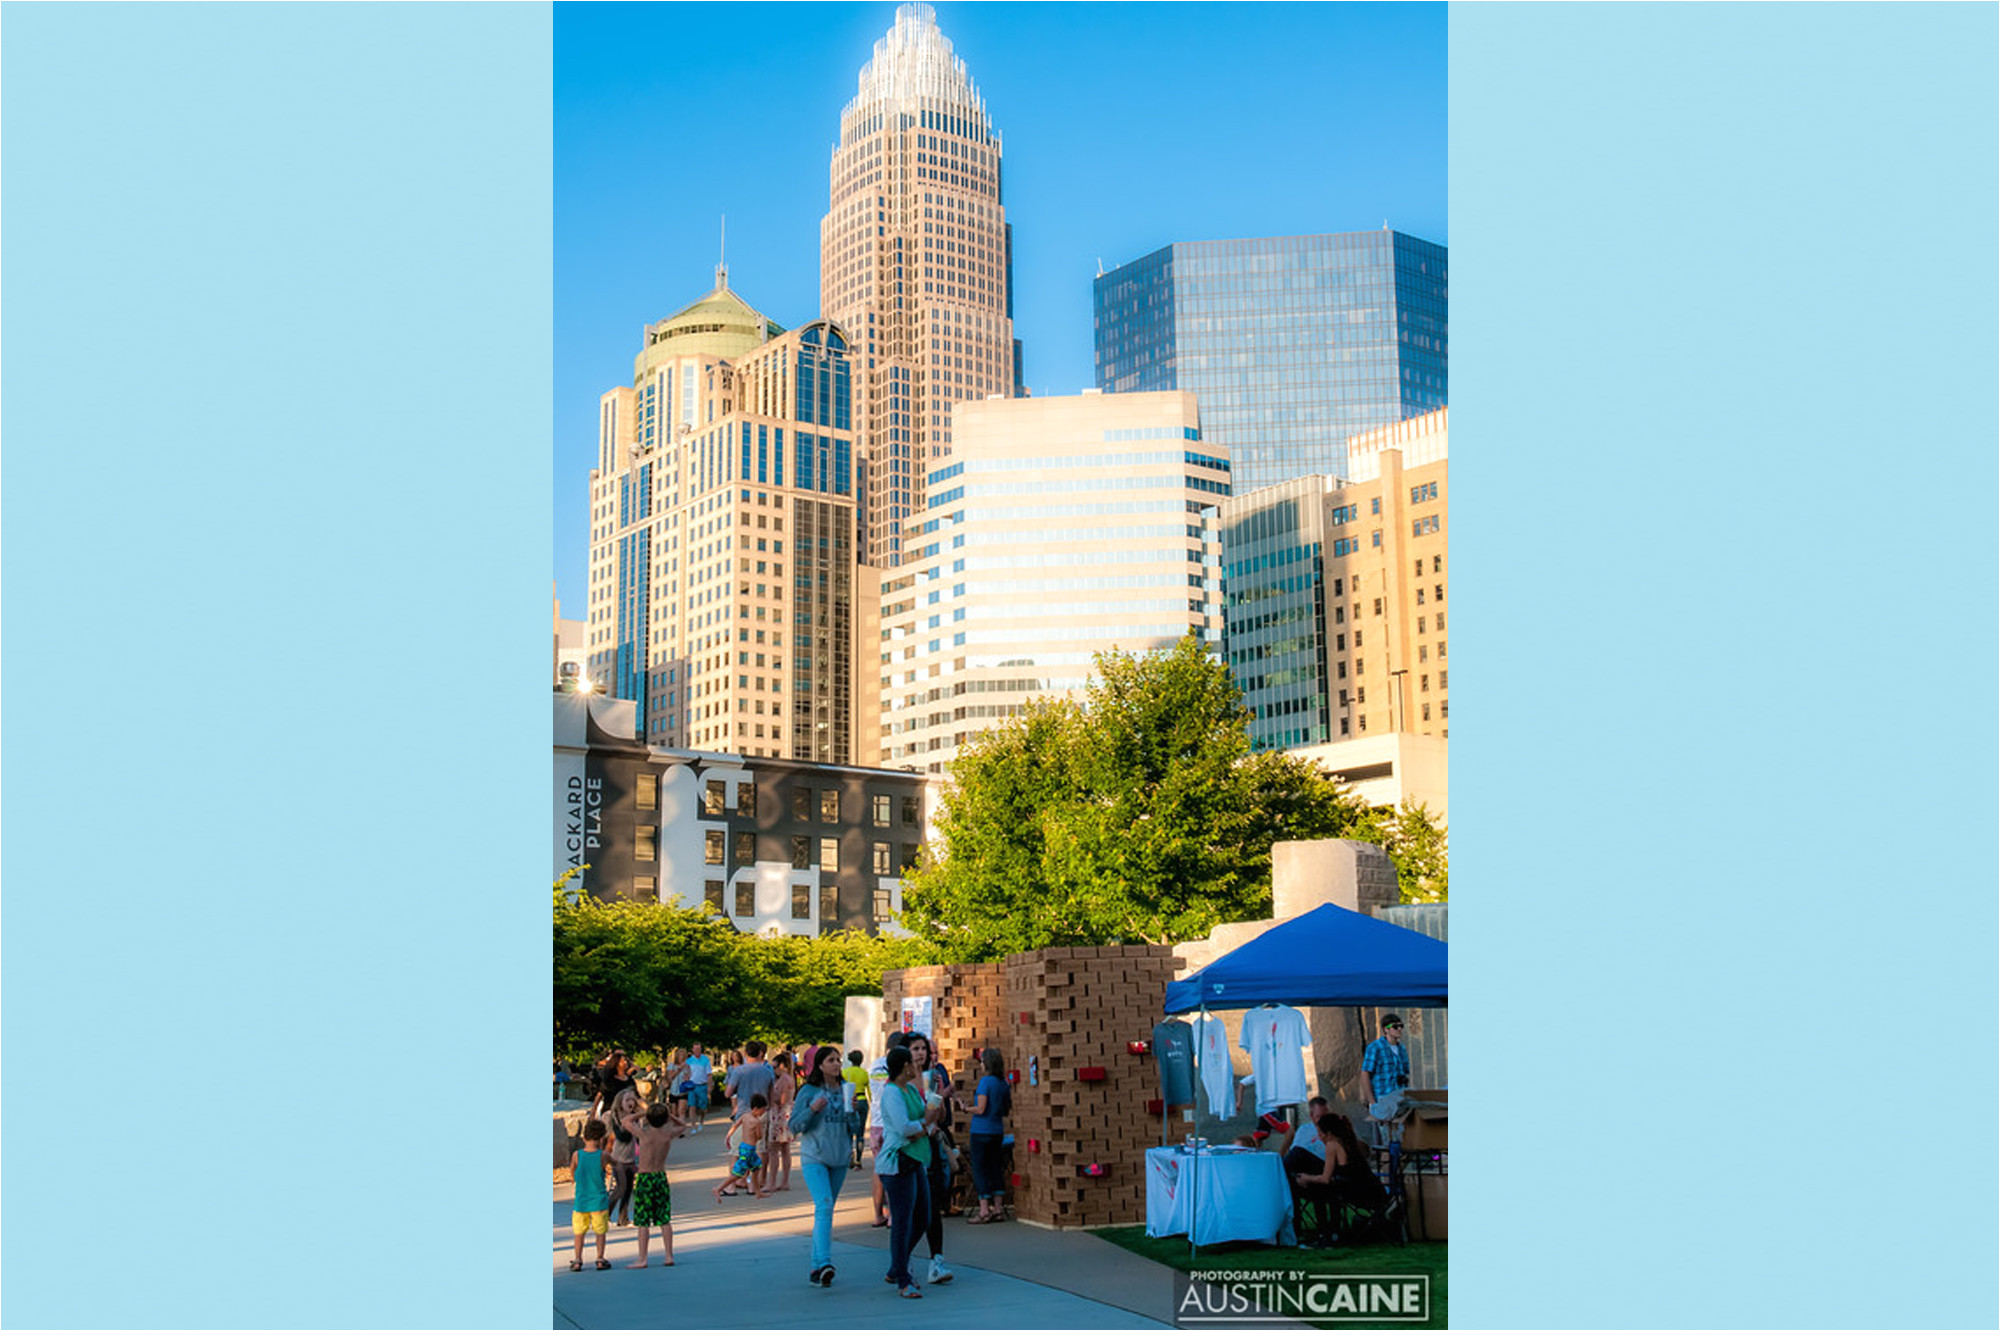 romare bearden park with the charlotte symphony